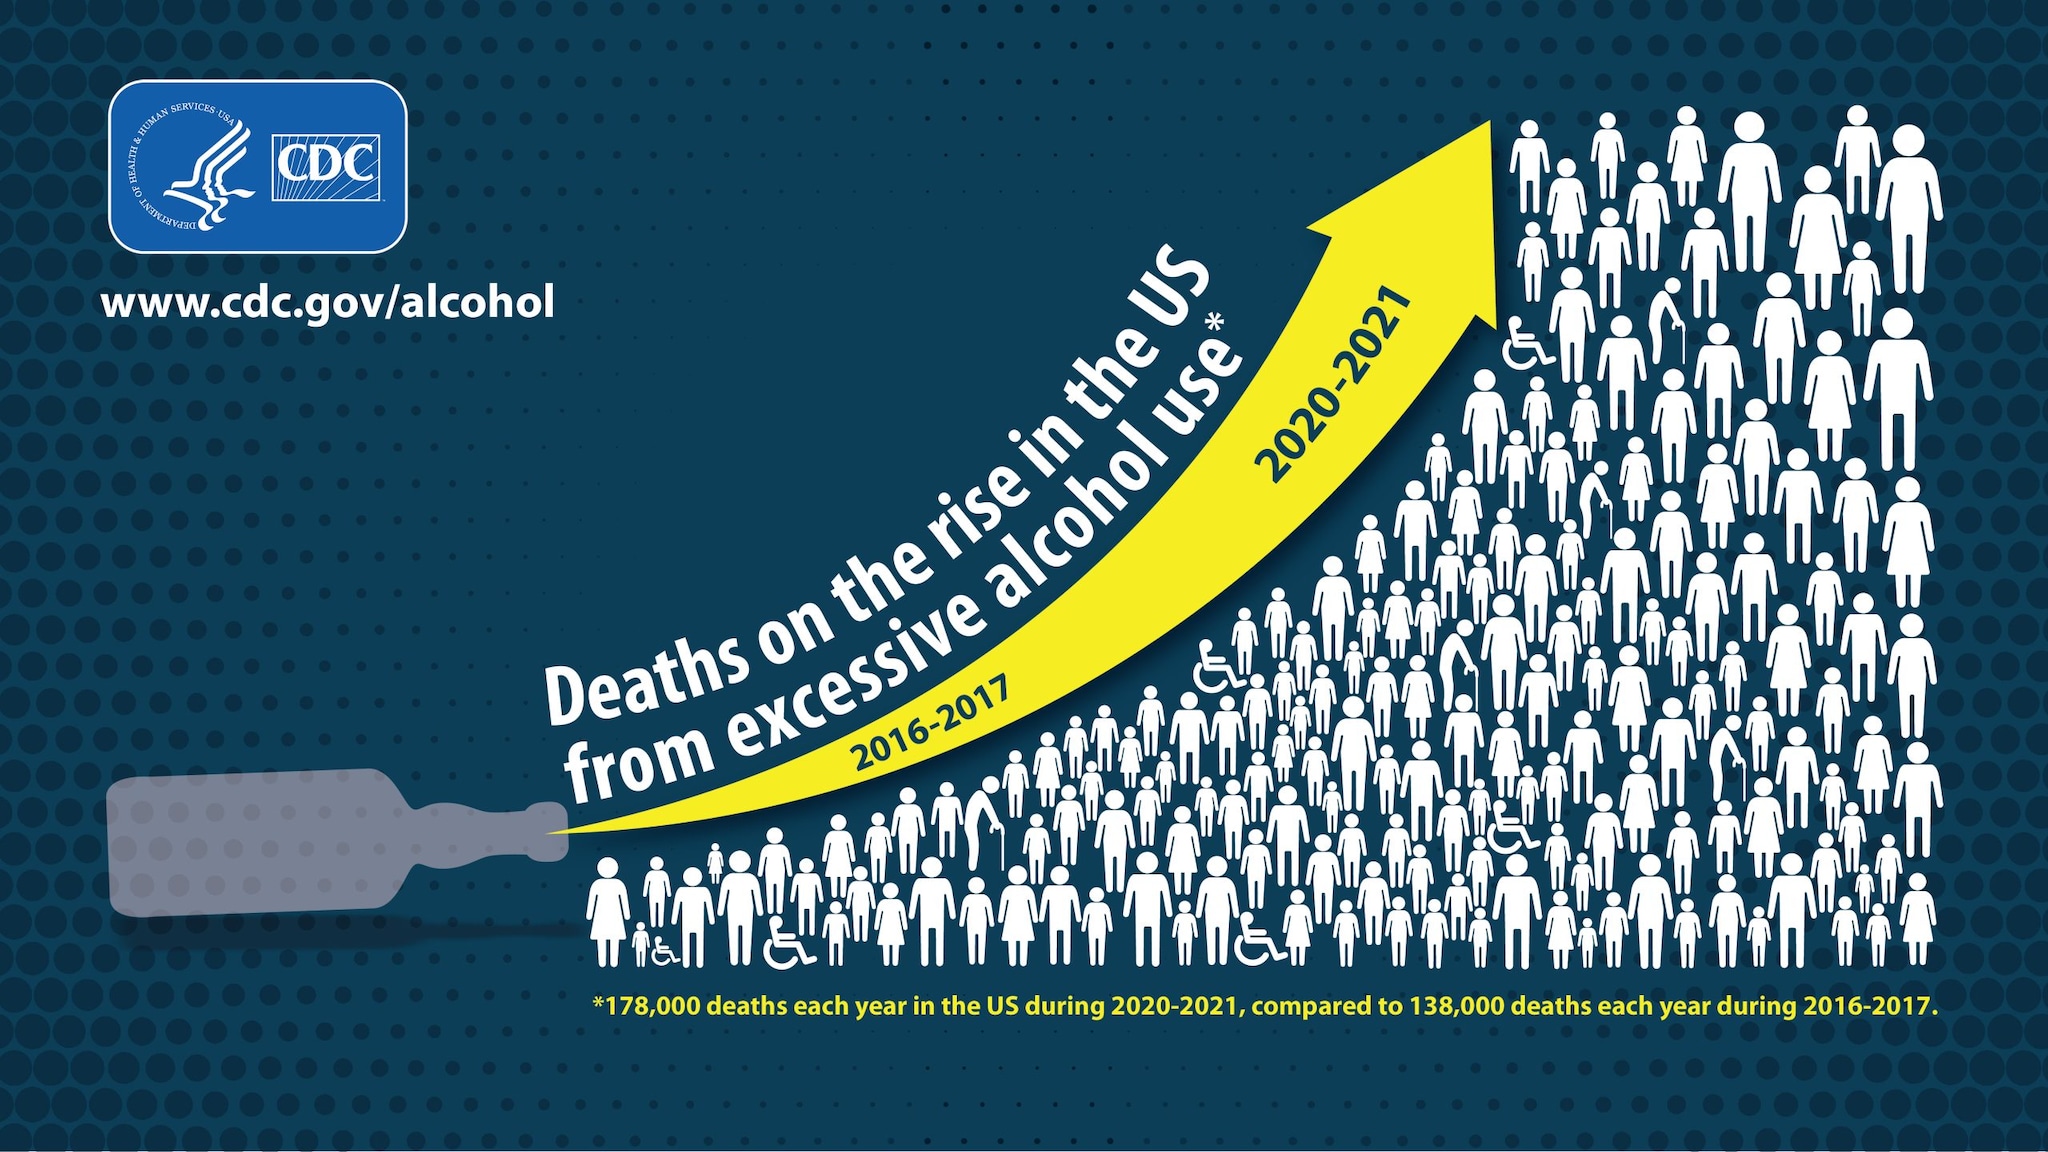 Deaths on the rise in the US due to excessive alcohol use.